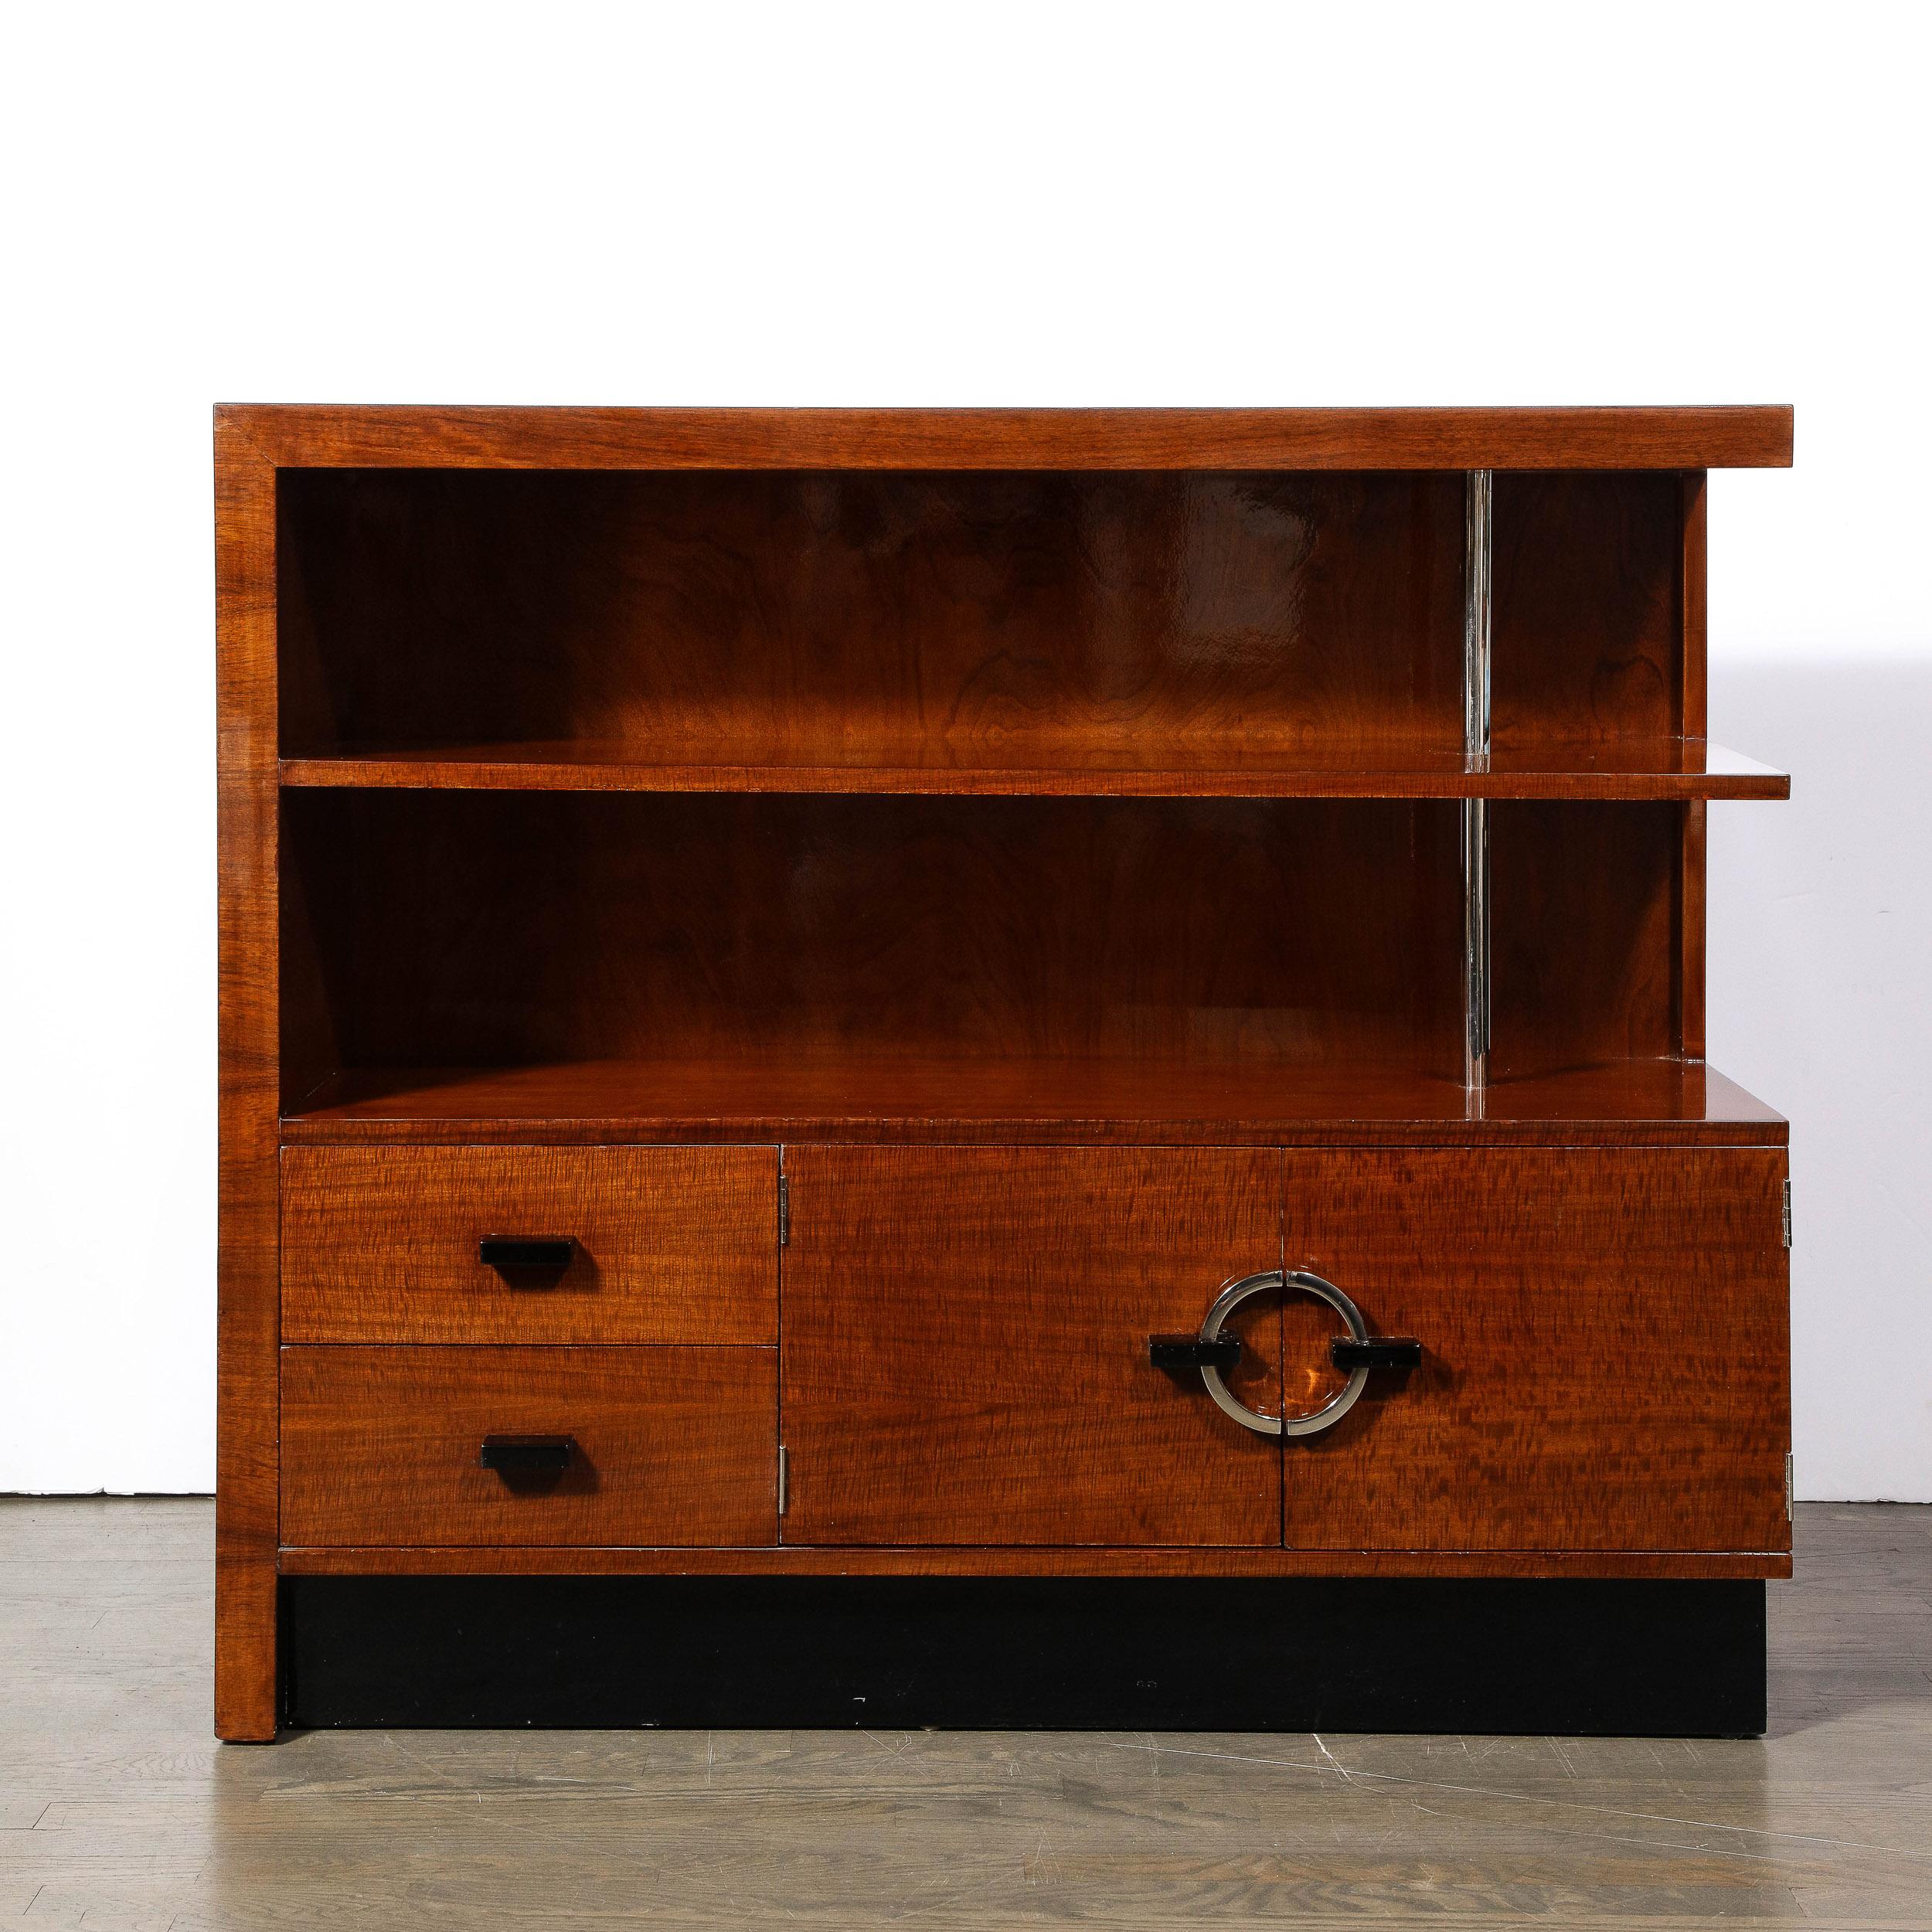 American Art Deco East Indian Laurel Bookcase by Gilbert Rohde for Herman Miller No. 344 For Sale